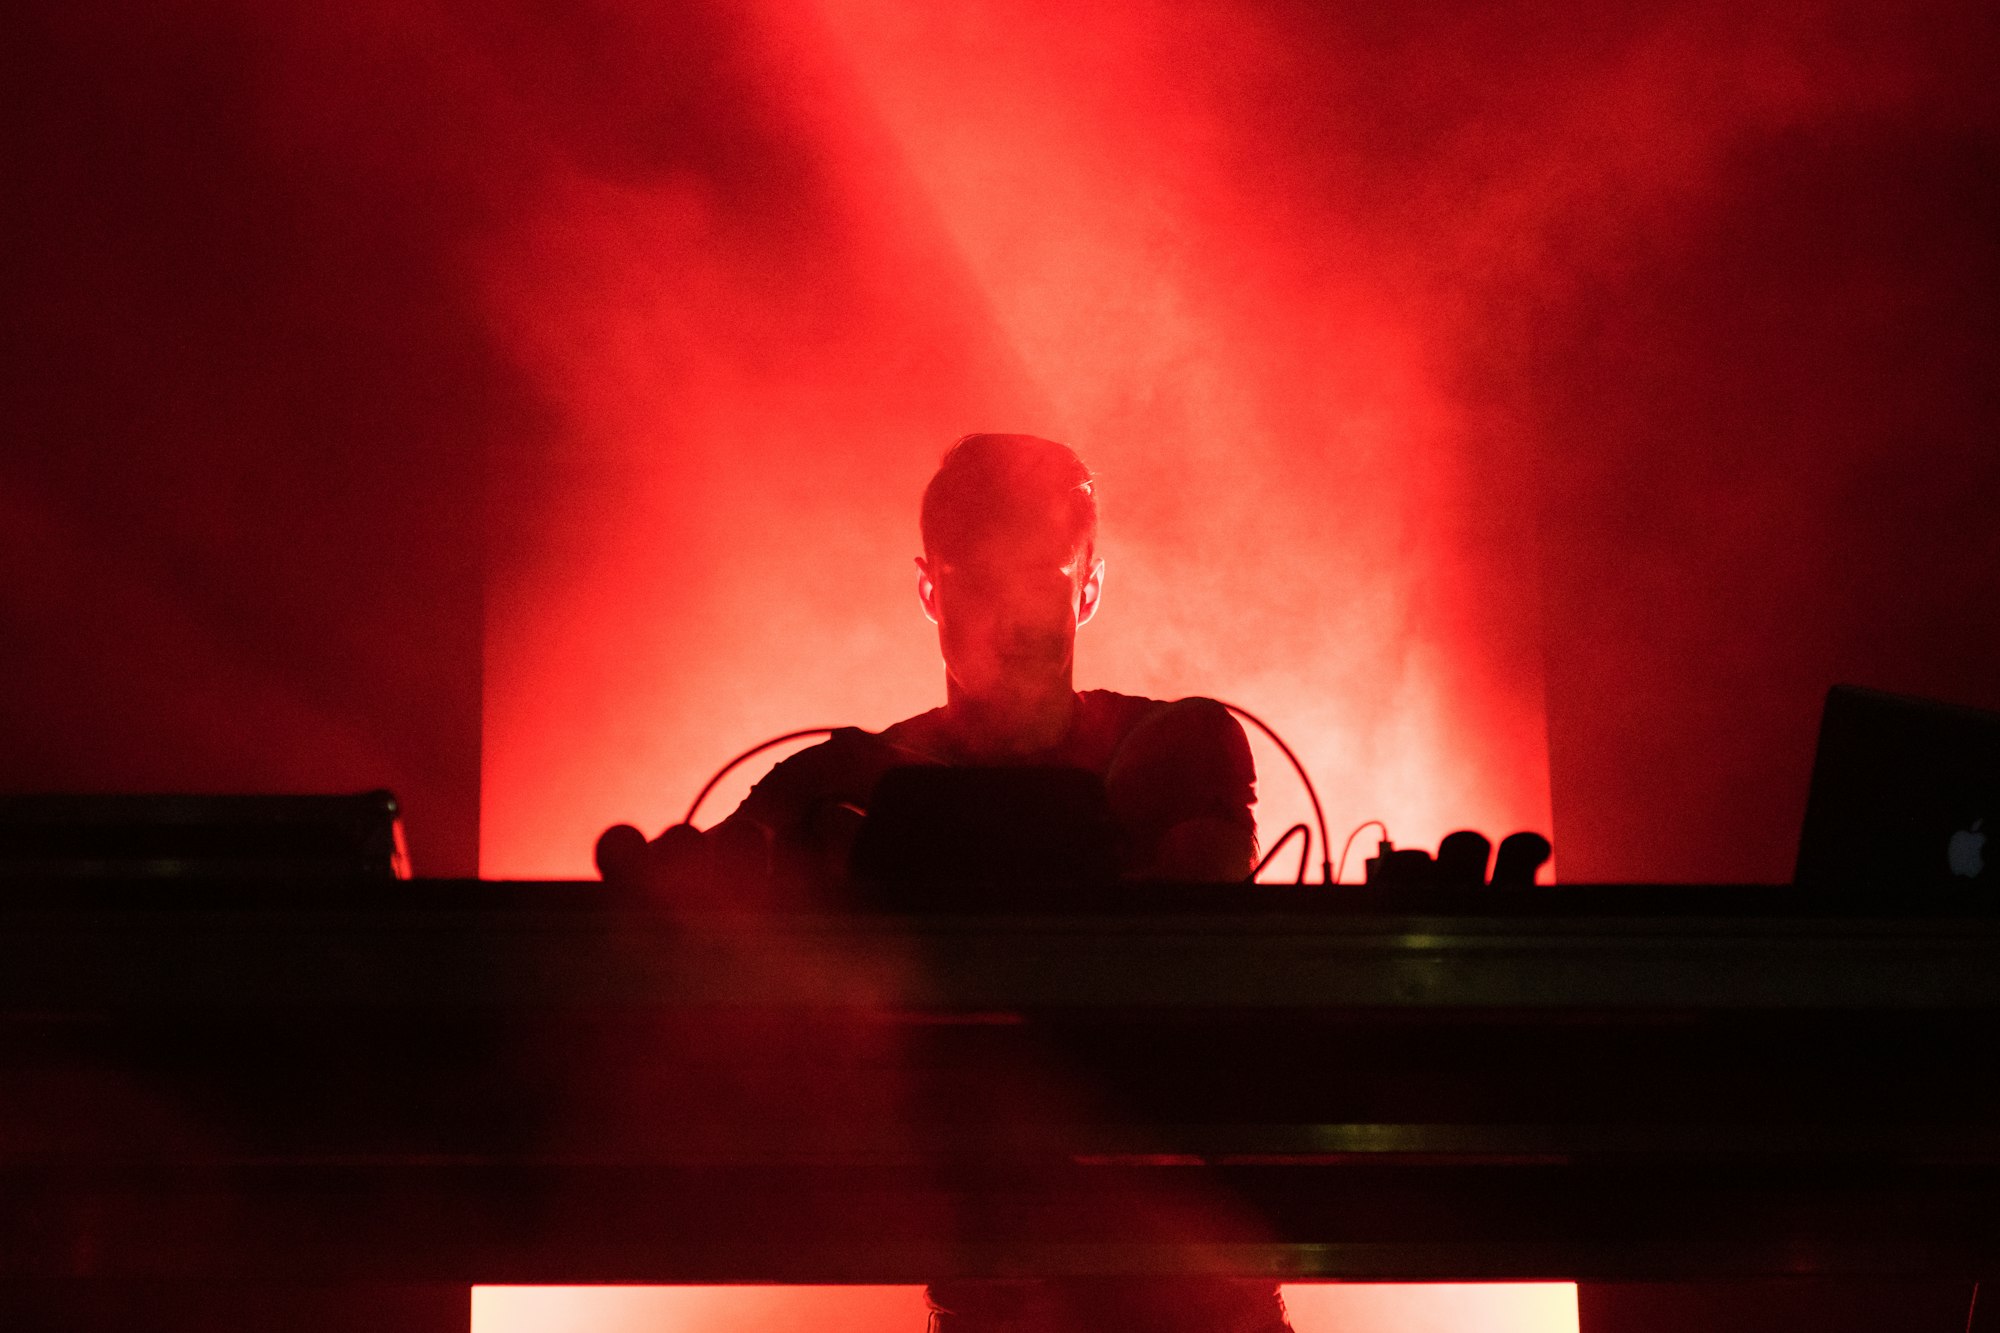 DJ playing music in red lights